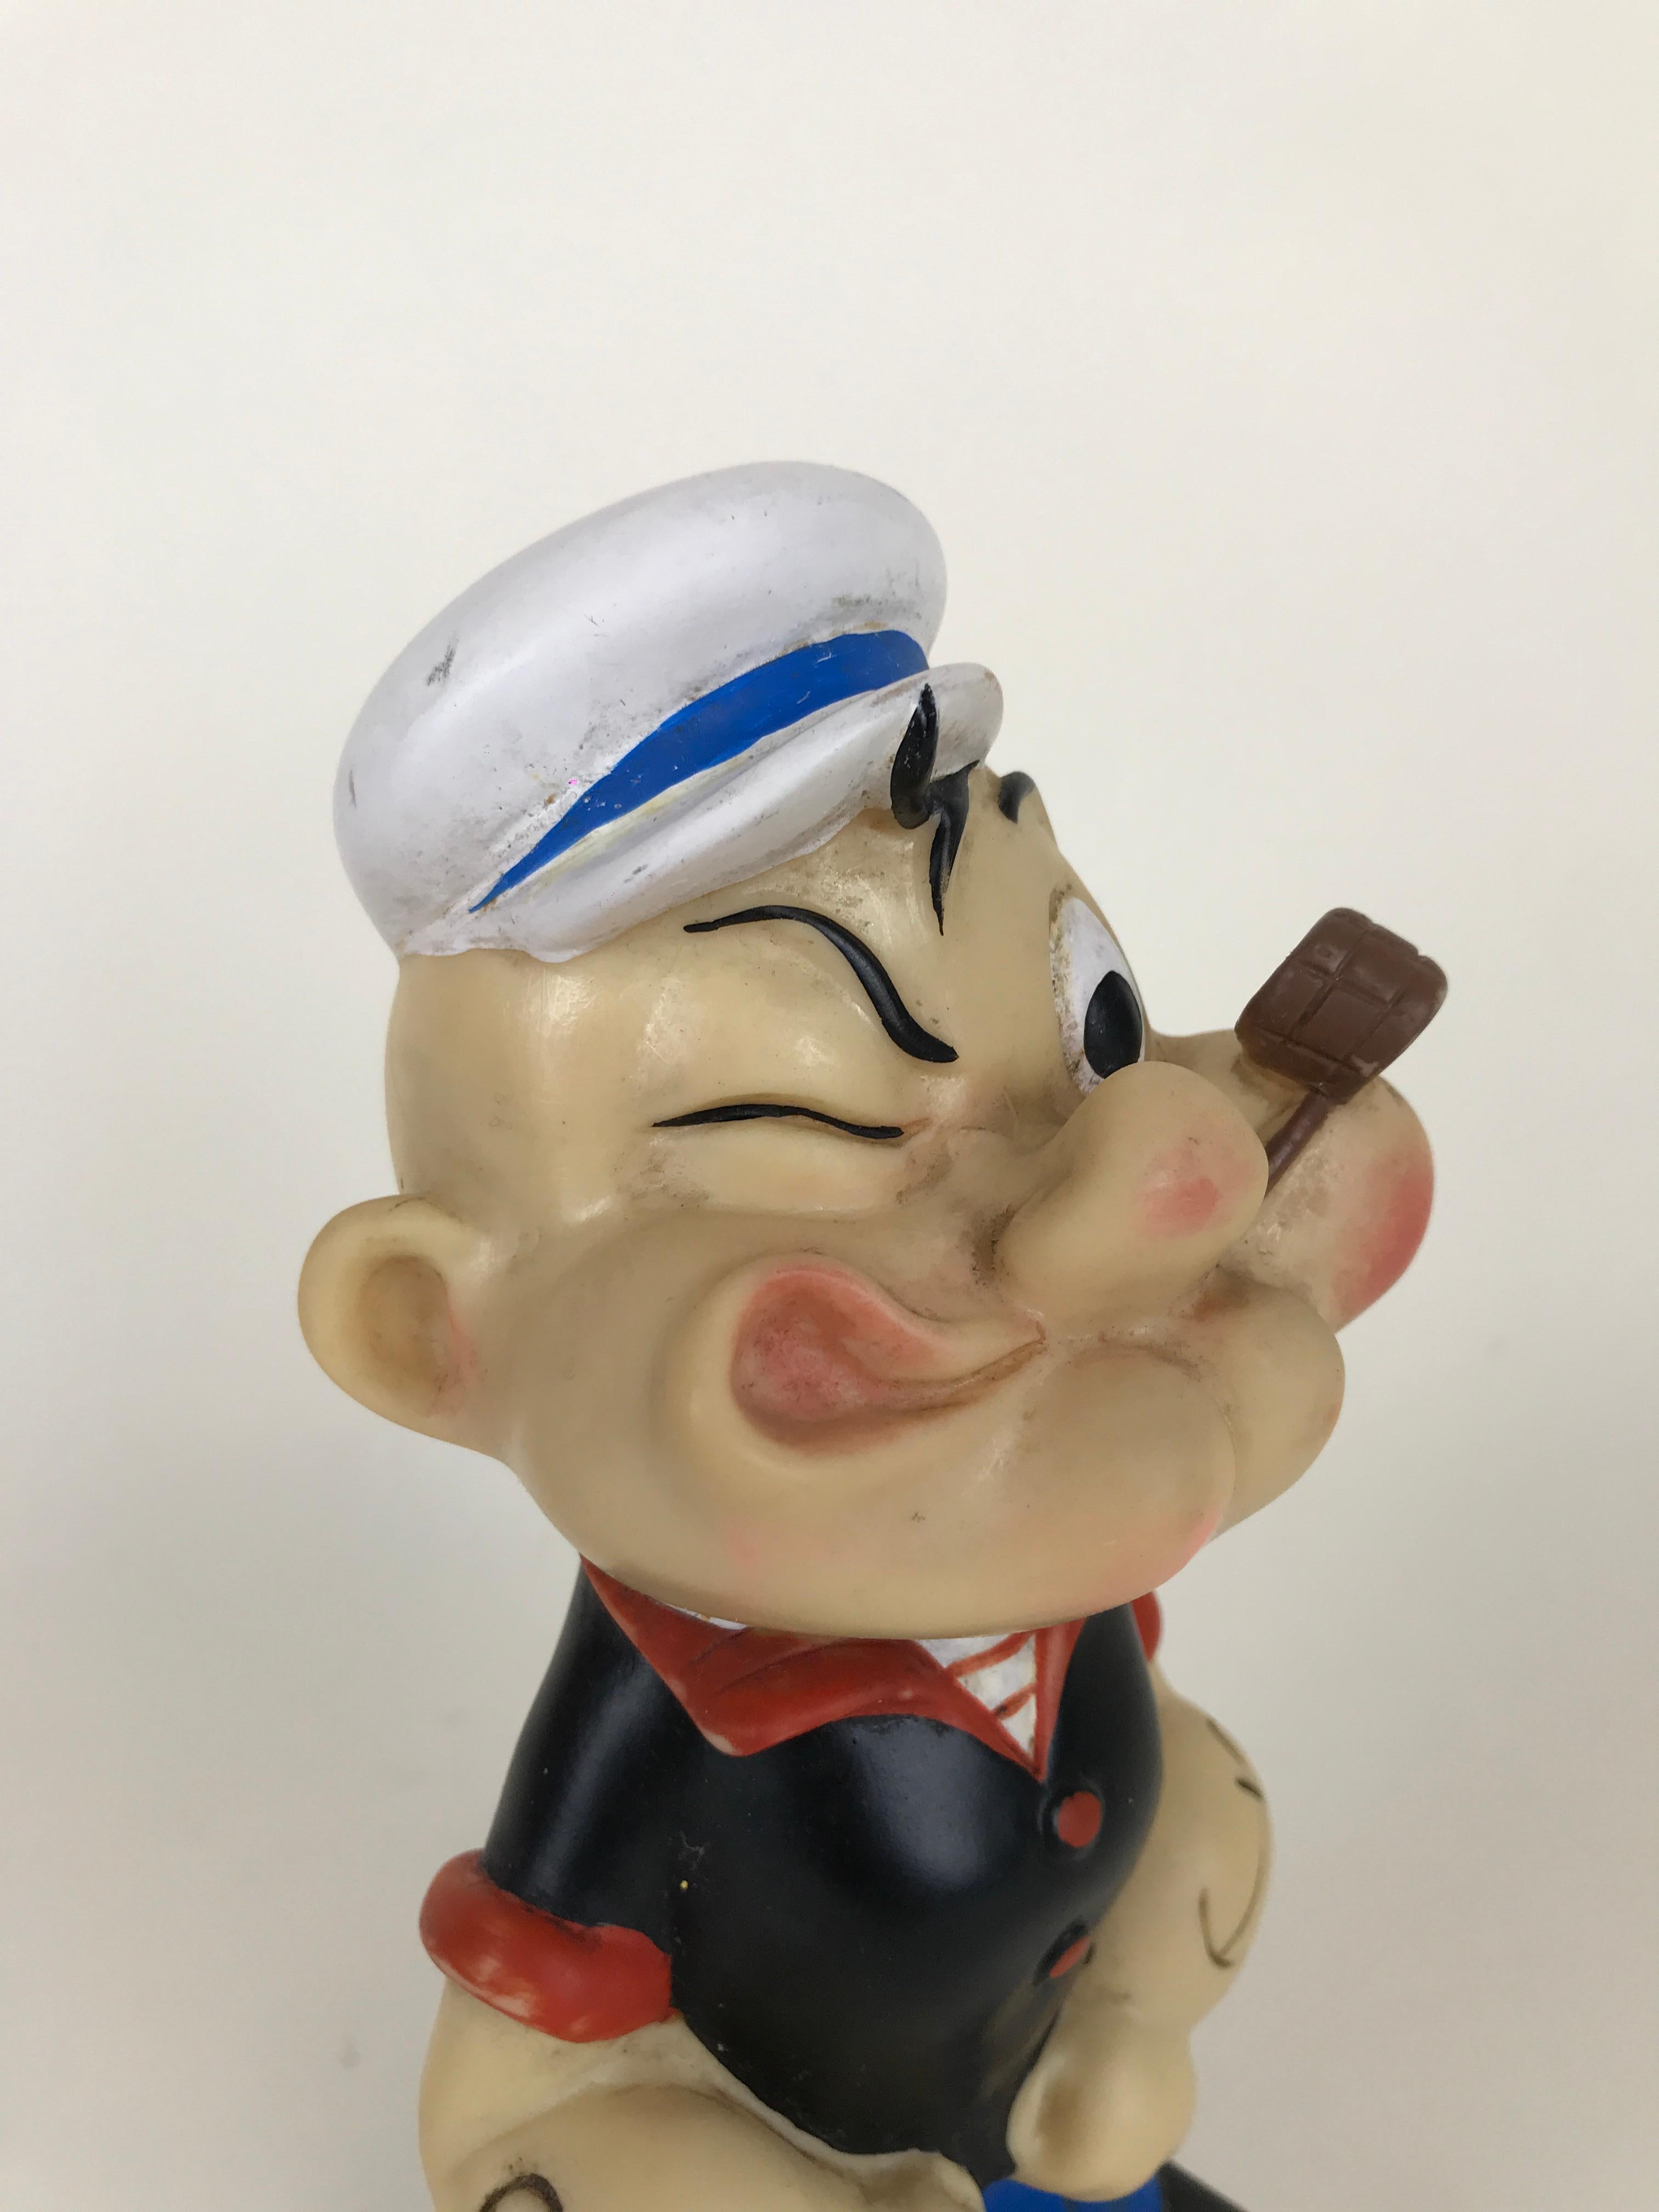 Mid-Century Modern 1960s Vintage Italian Popeye the Sailor Rubber Squeak Toy Made by Italo Cremona For Sale